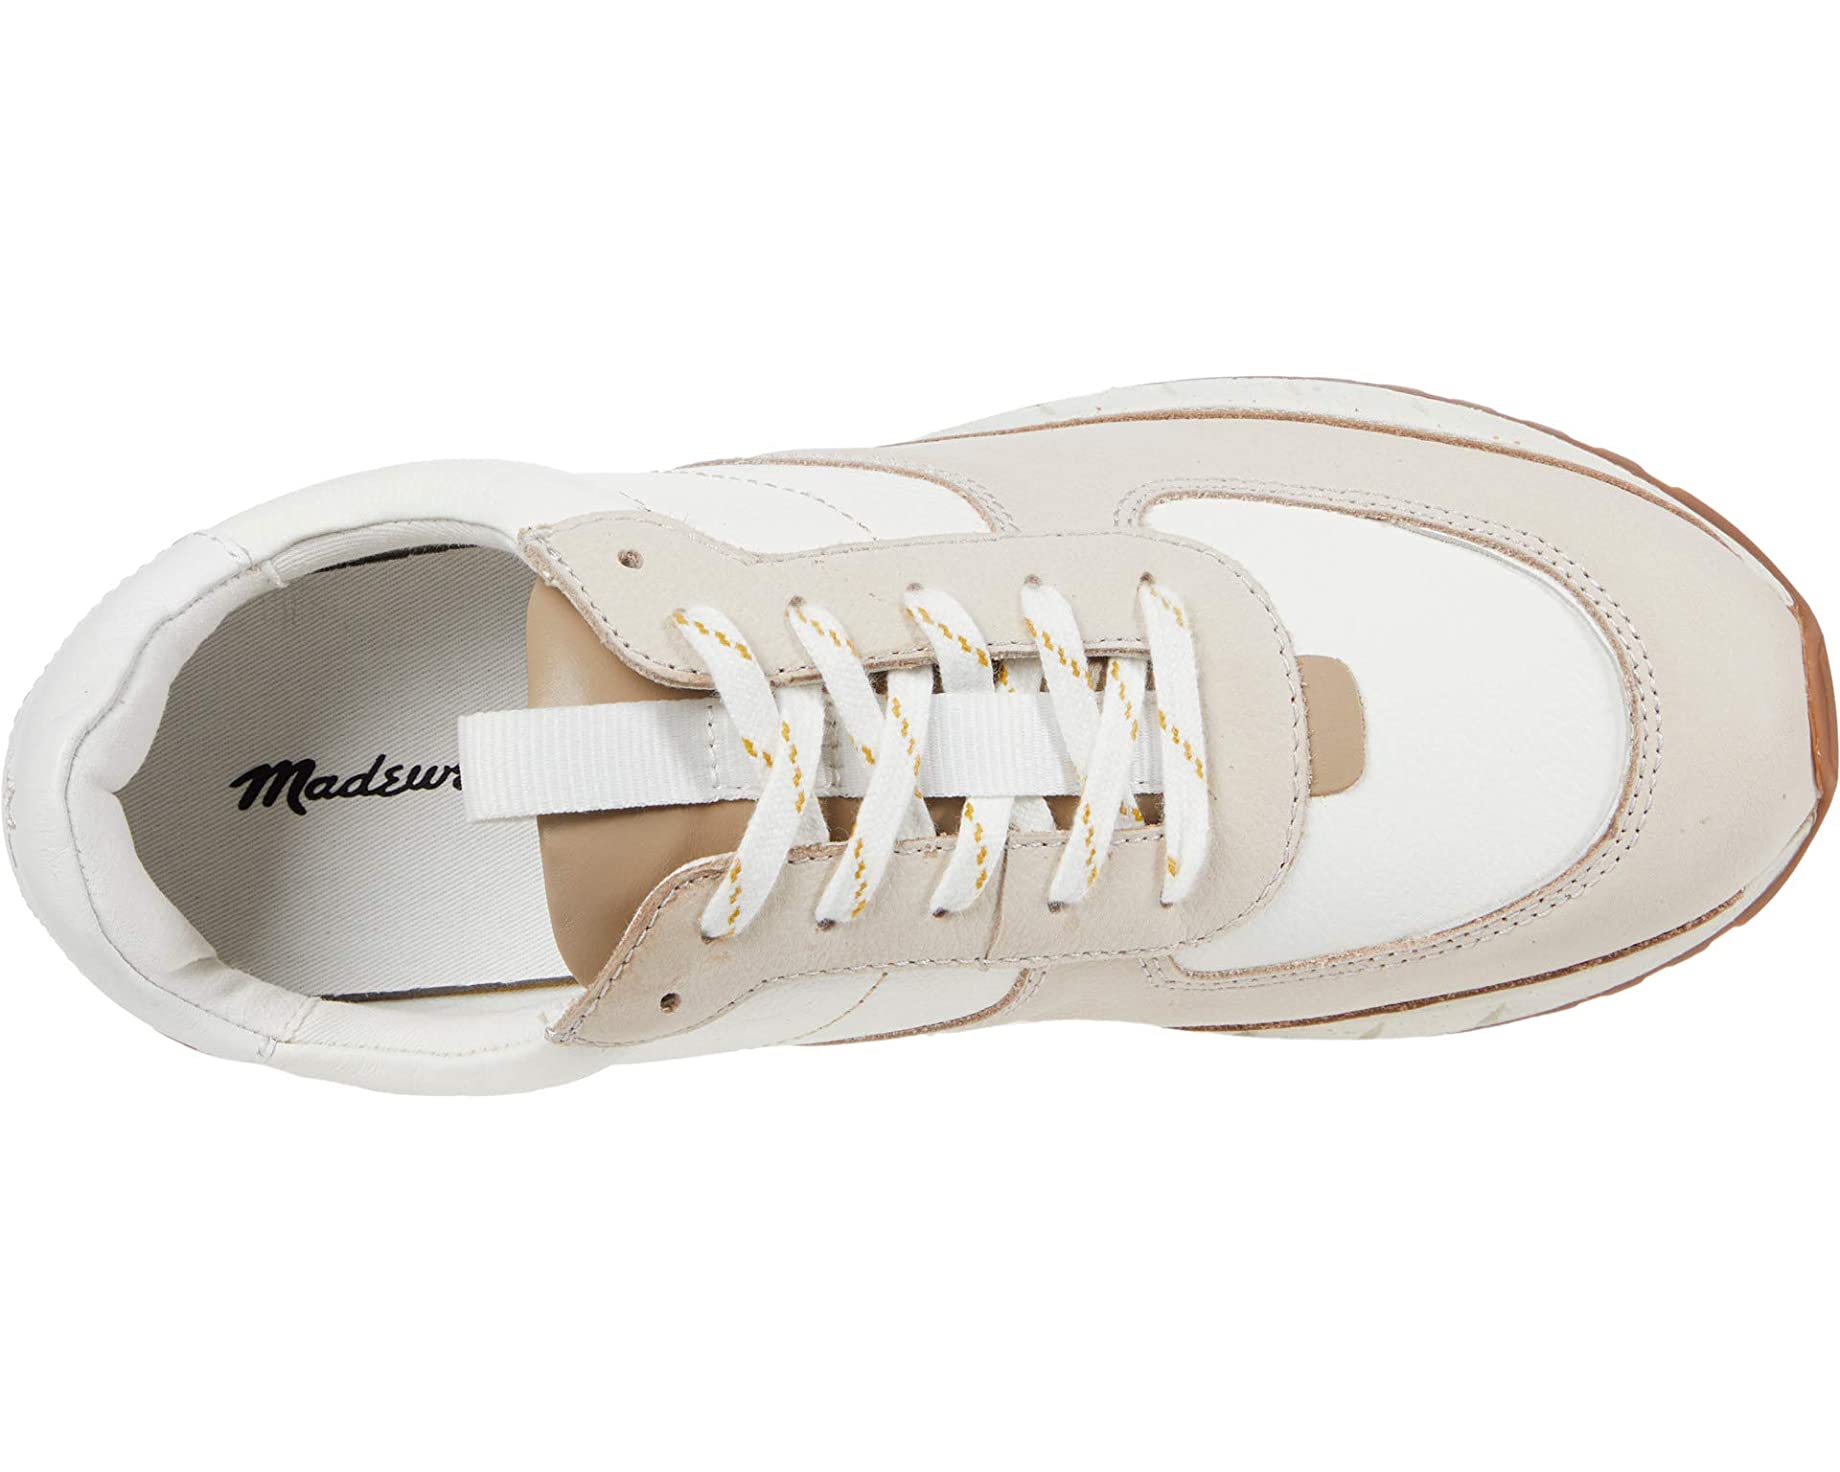 Кроссовки Kickoff Trainer Sneakers in Neutral Colorblock Leather Madewell, кремовый